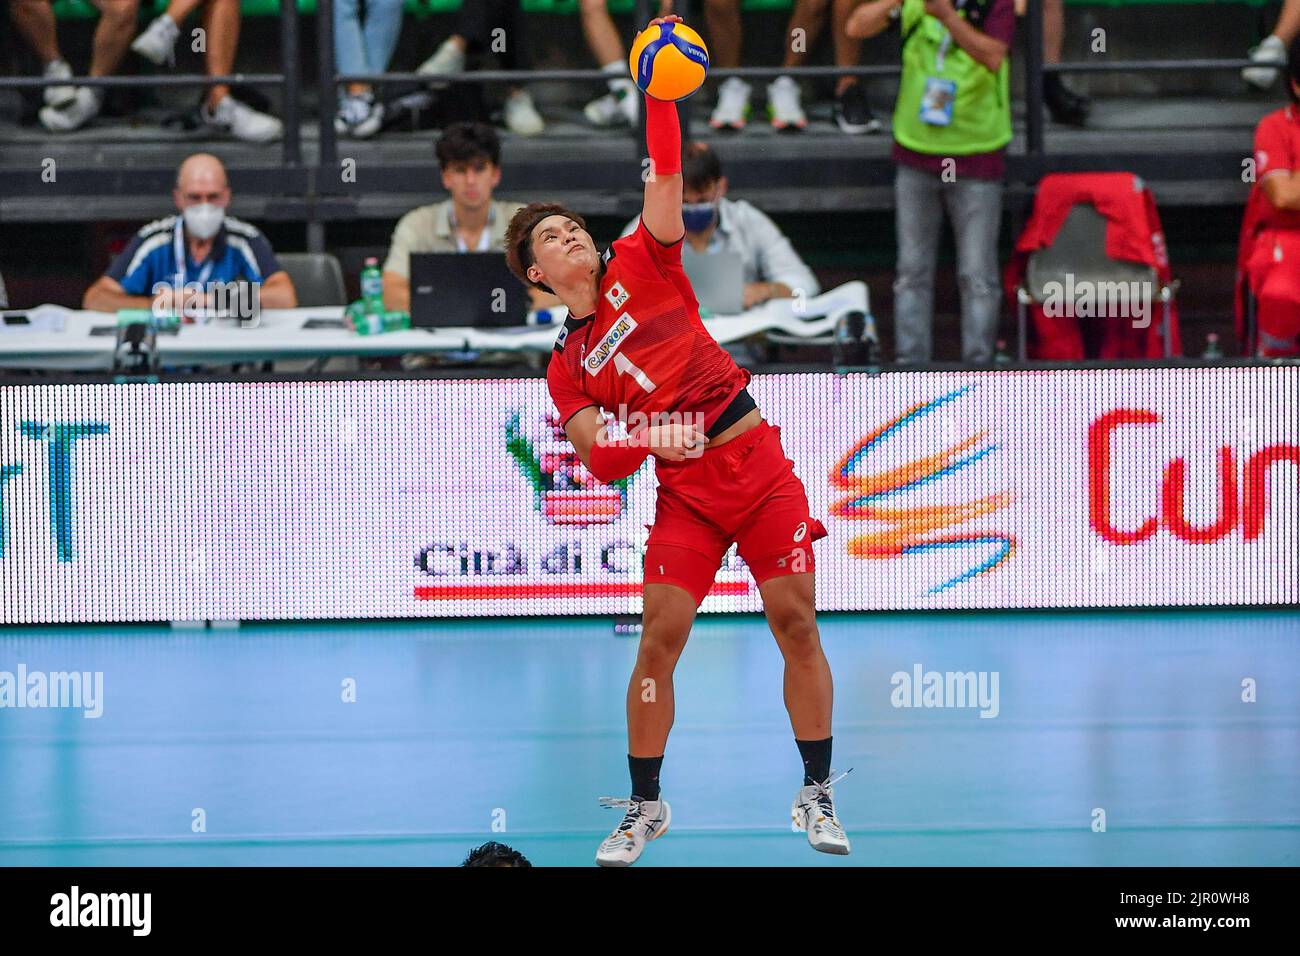 Cuneo, Italy. 20th Aug, 2022. Nishida Yuji (Japan) during DHL Test Match Tournament - Italy vs Japan, Volleyball Intenationals in Cuneo, Italy, August 20 2022 Credit: Independent Photo Agency/Alamy Live News Stock Photo